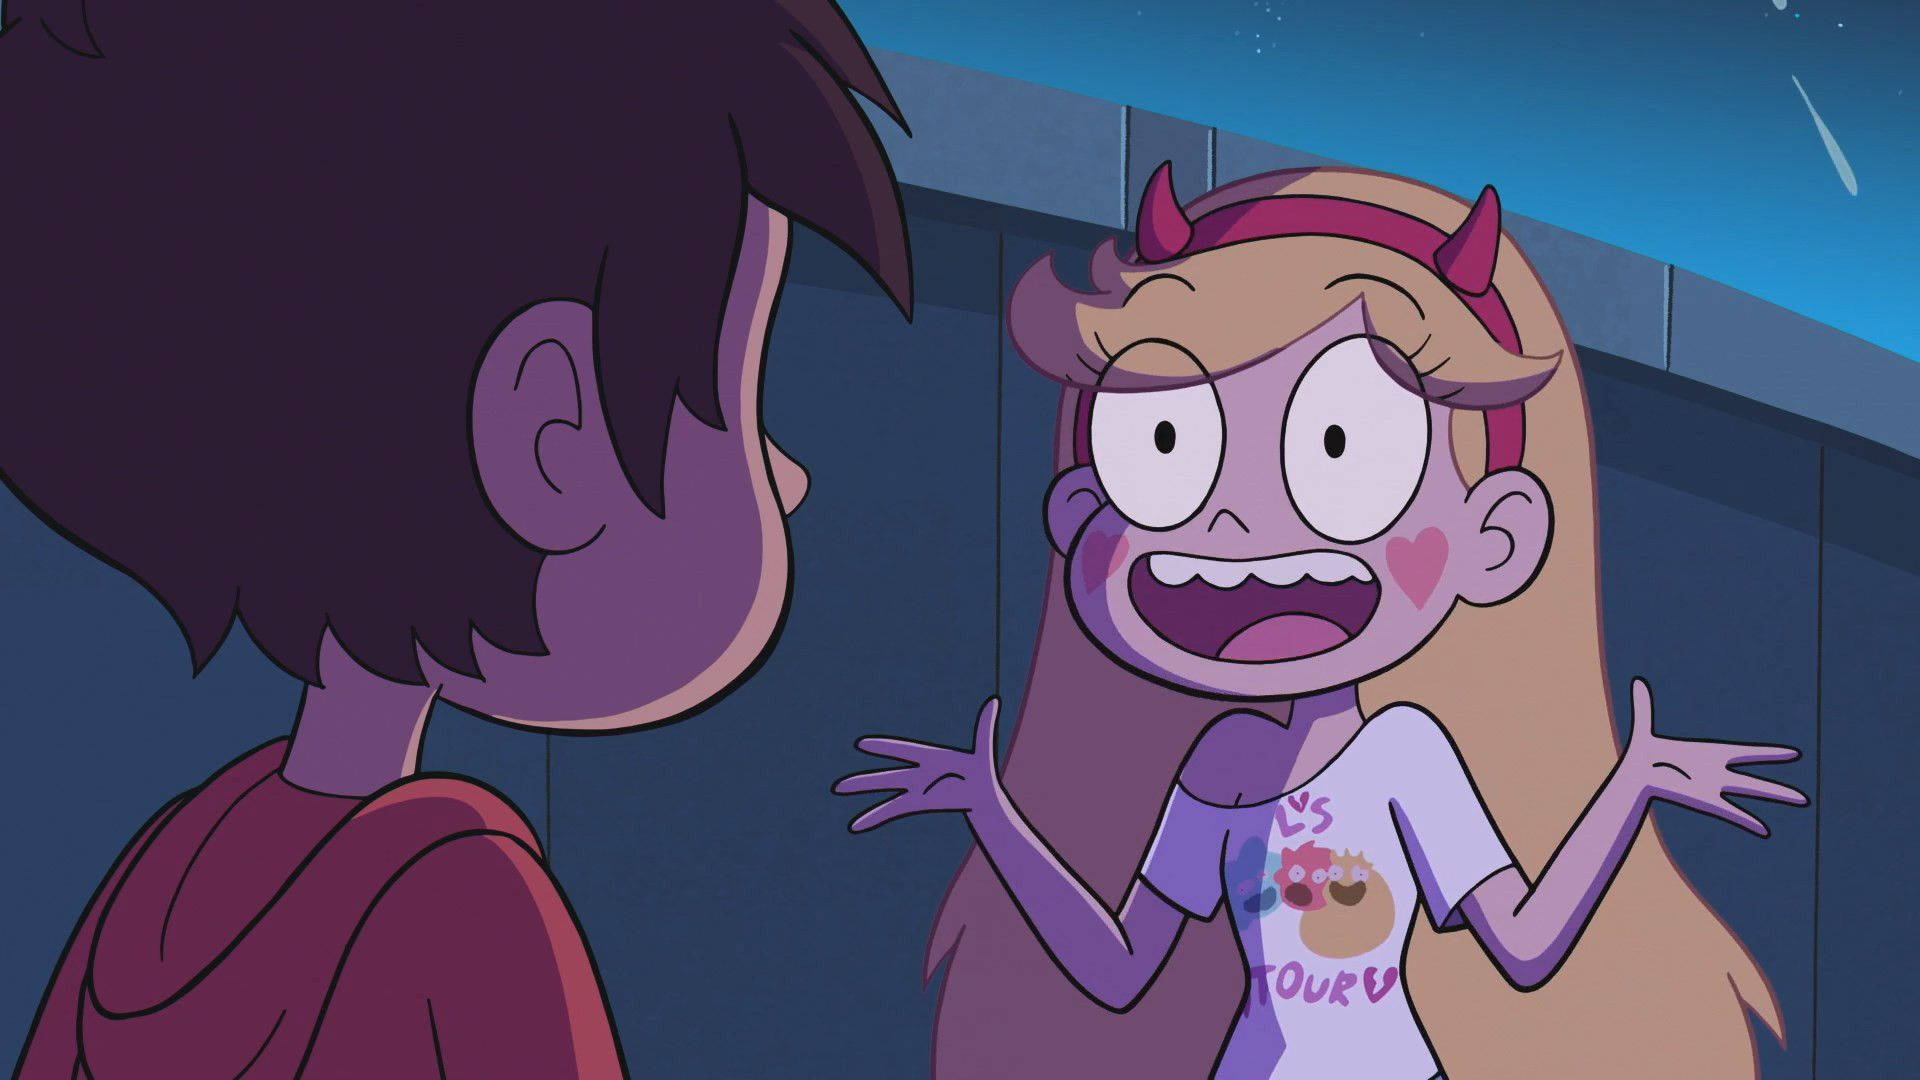 Star Butterfly and Marco Diaz from Star vs. The Forces of Evil Animated Series Wallpaper